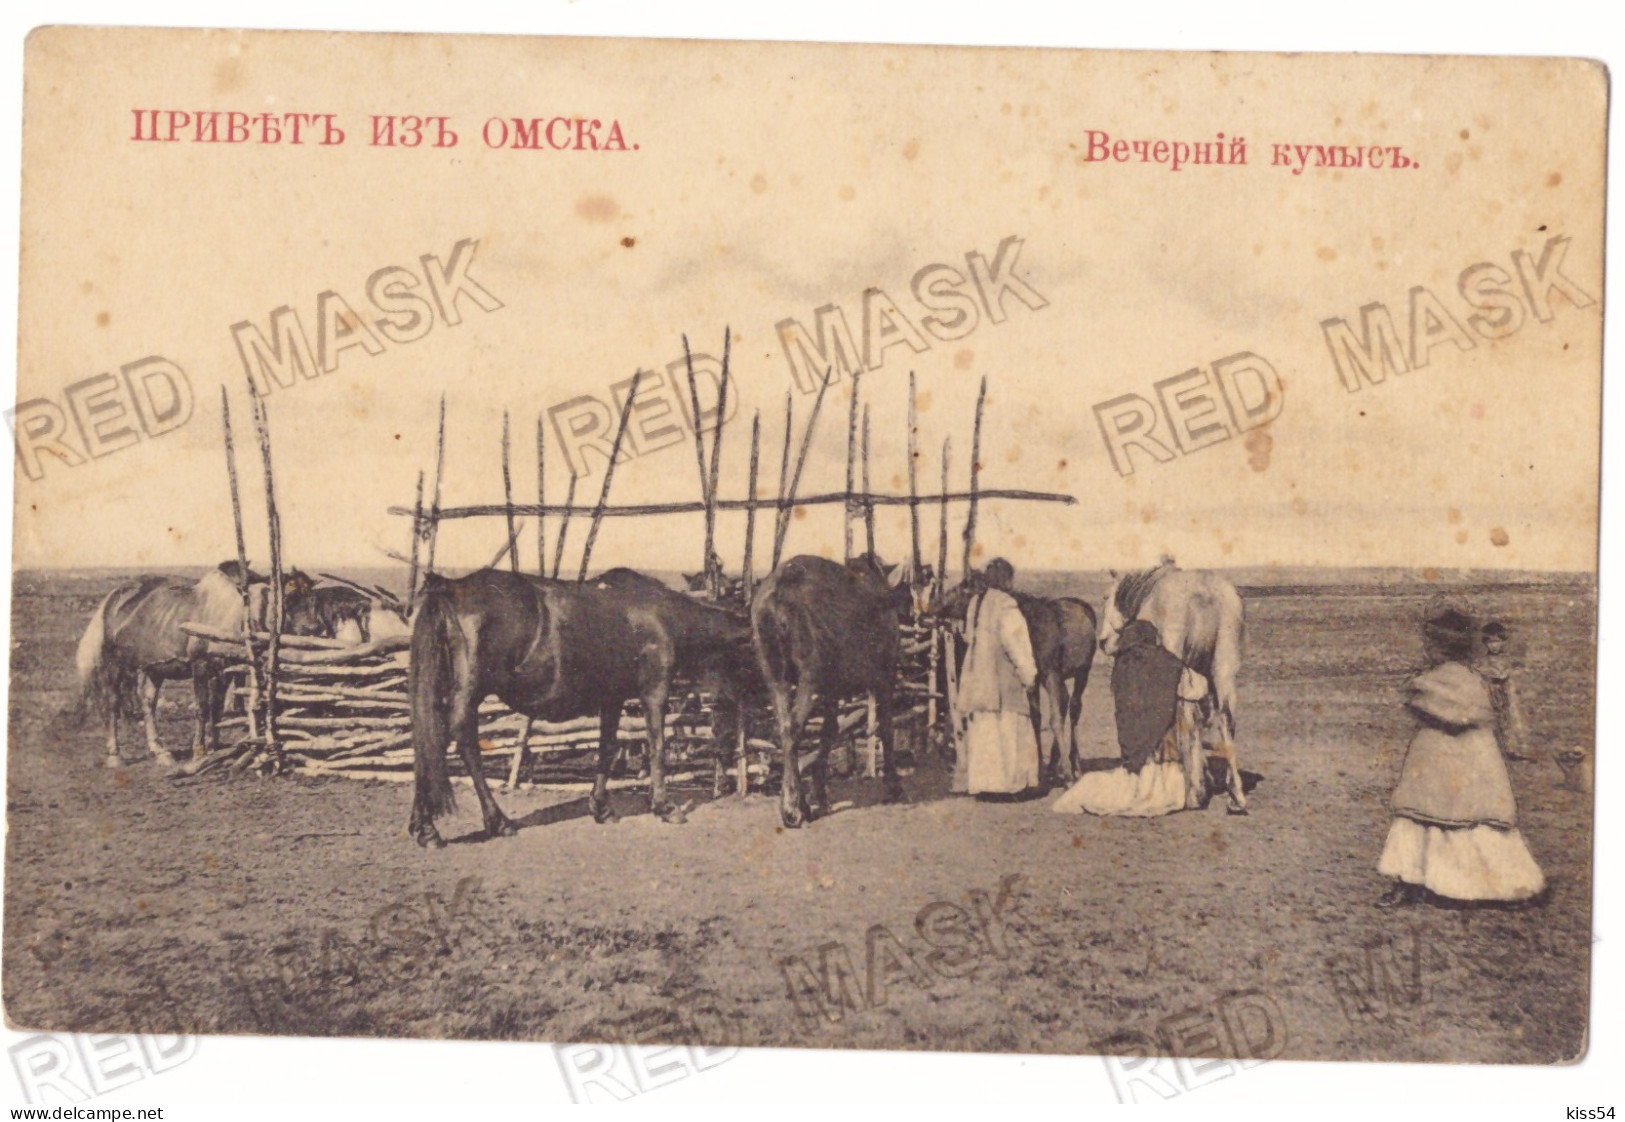 RUS 60 - 22245 OMSK Ethnic With Horses, Russia - Old Postcard - Unused - Russia